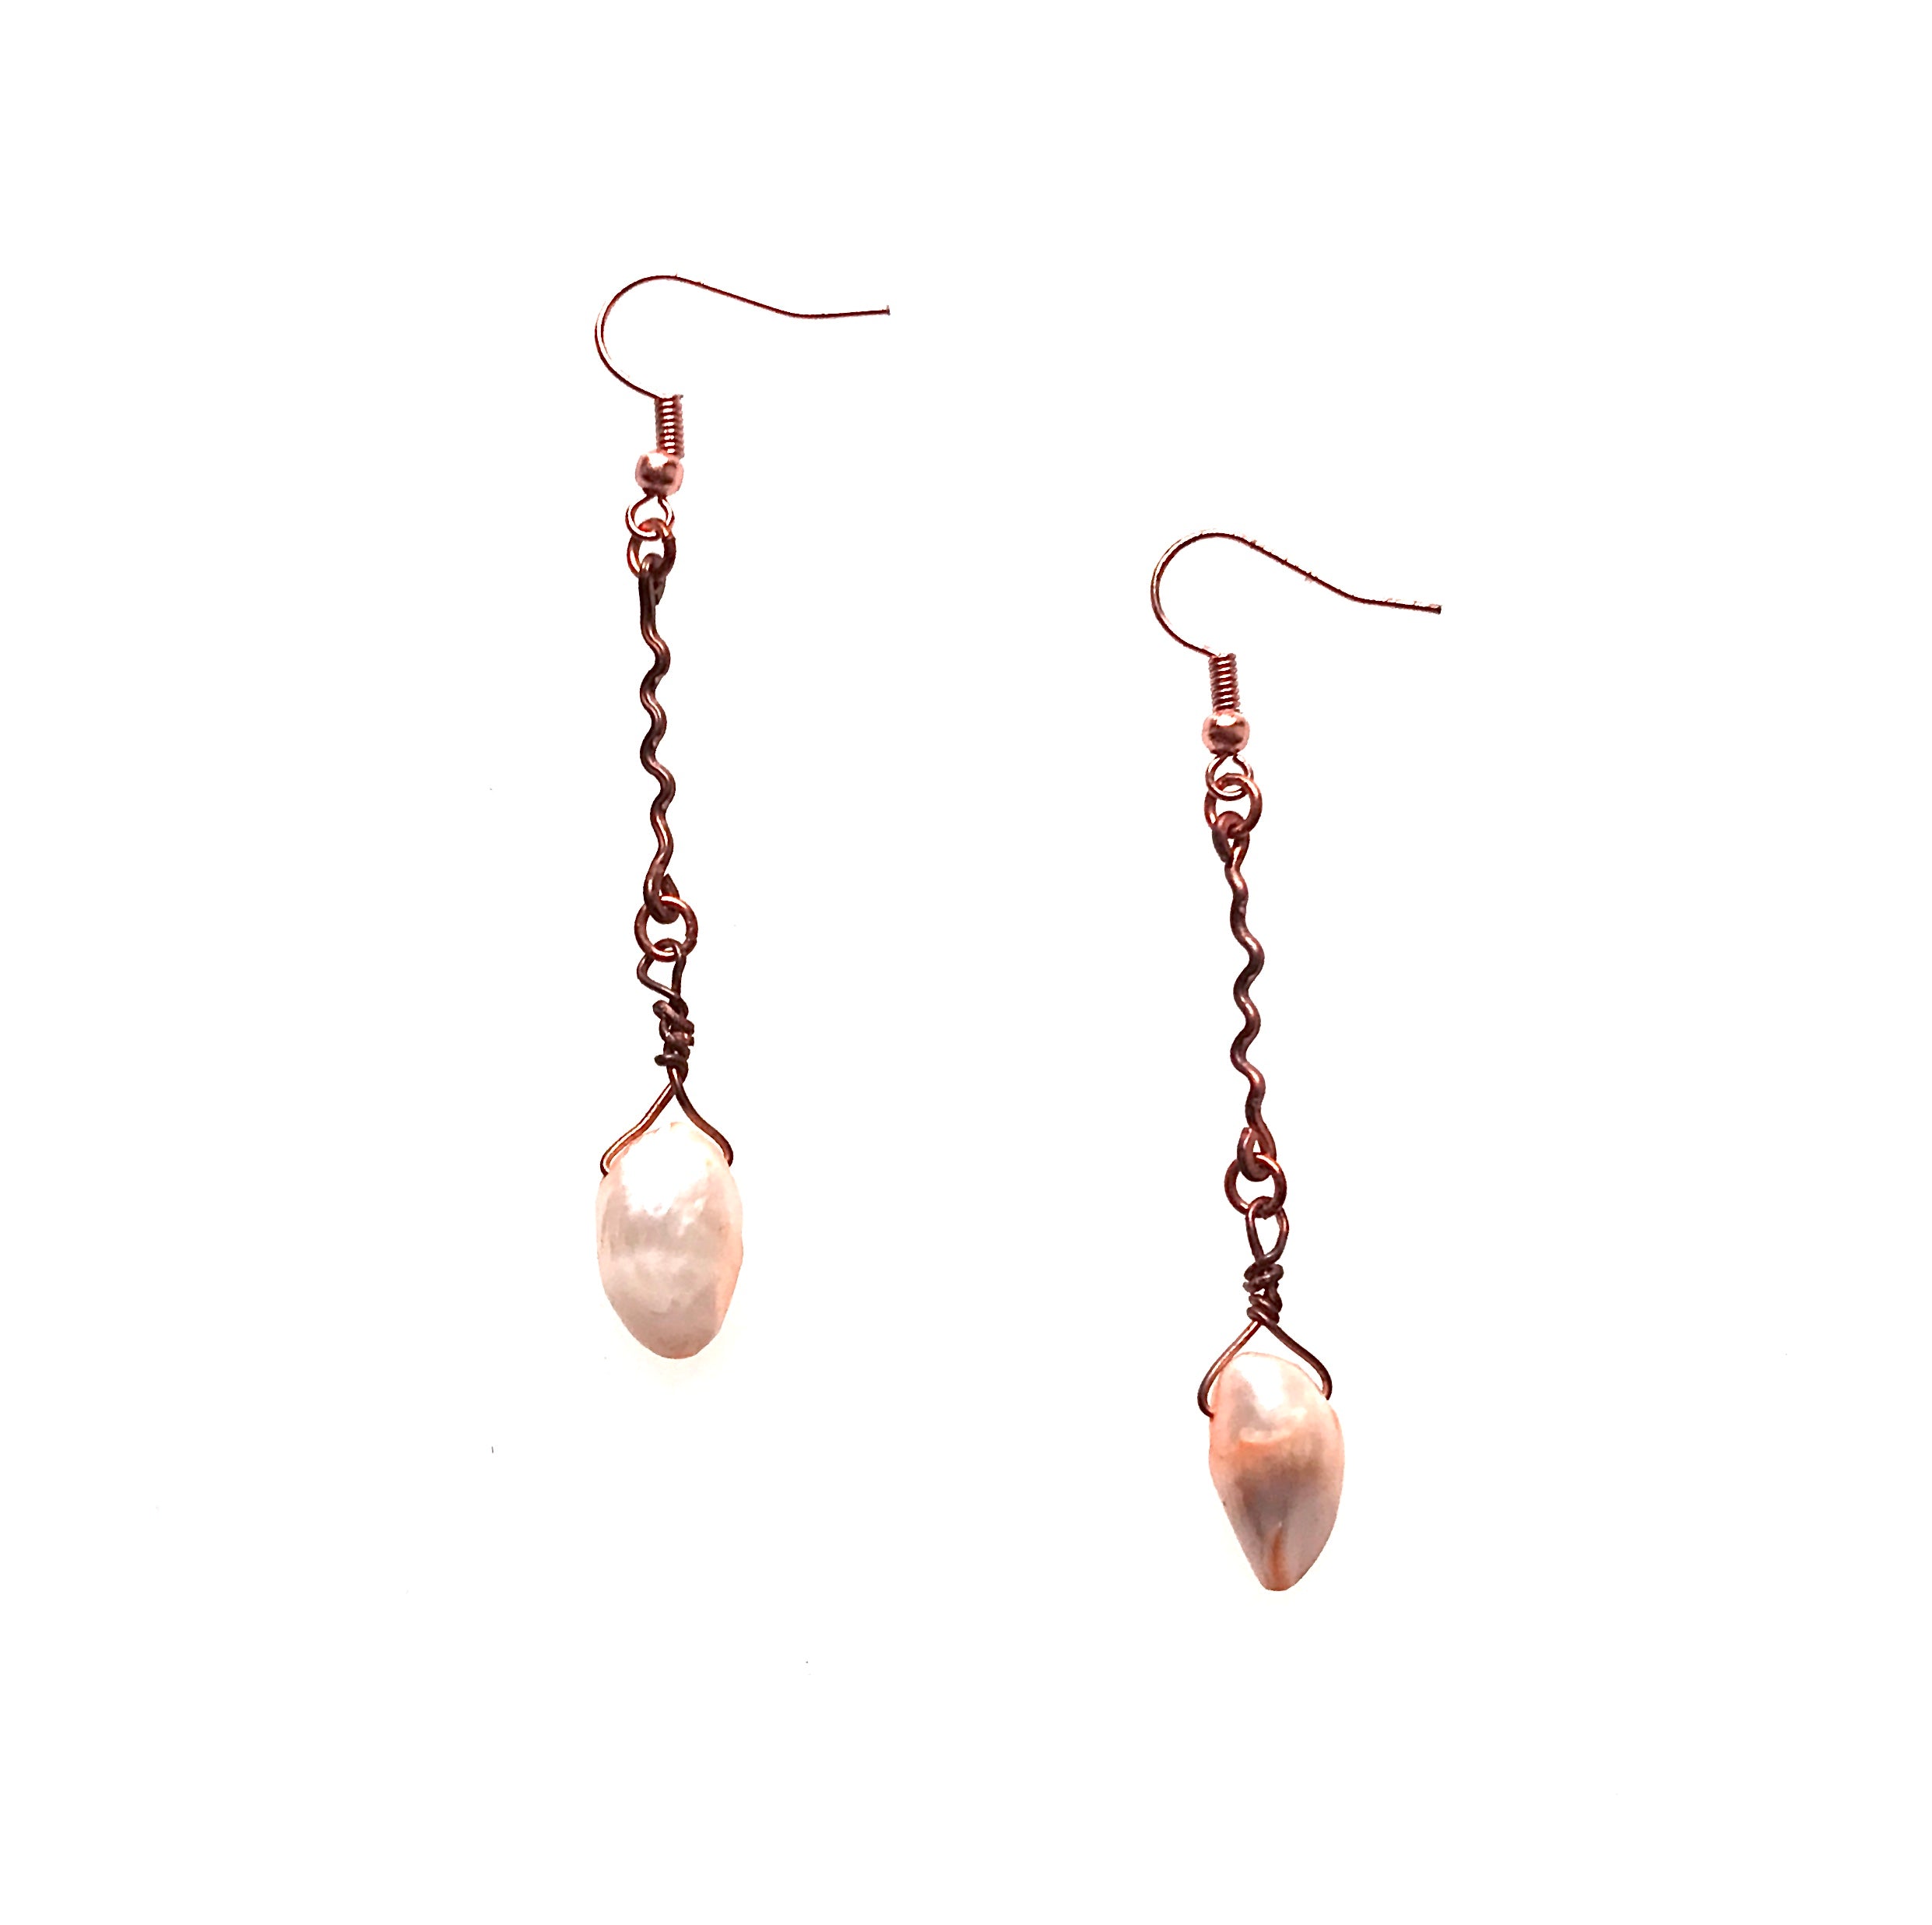 Shows copper and pearl drop earrings featuring squiggly copper wire with a dangling, teardrop-shape peach-colored pearl.